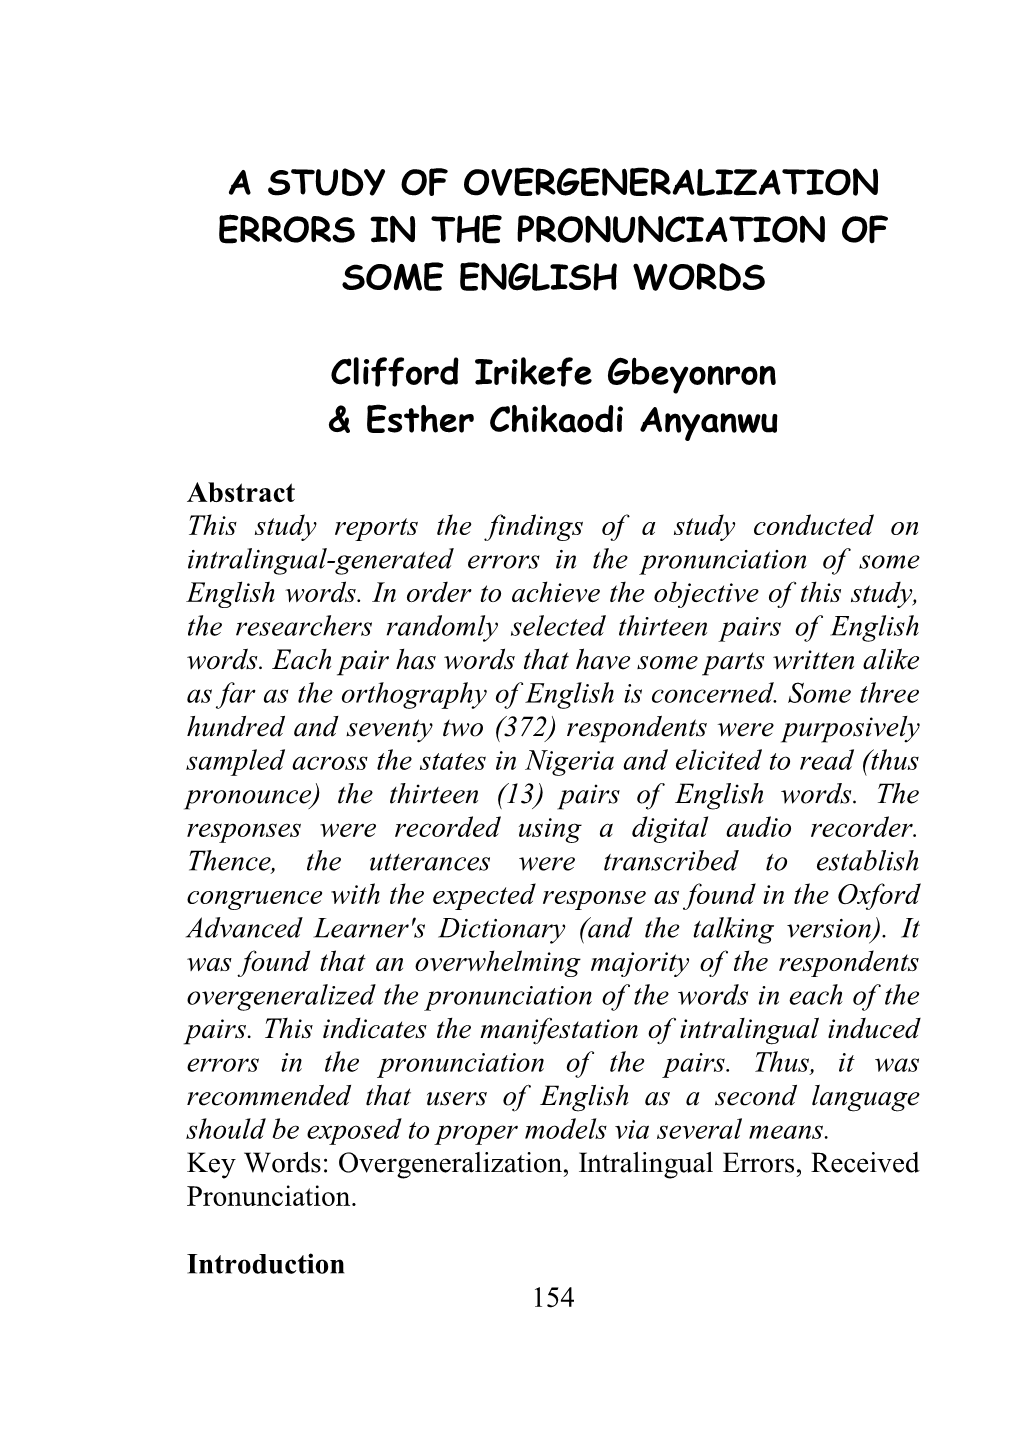 A Study of Overgeneralization Errors in the Pronunciation of Some English Words